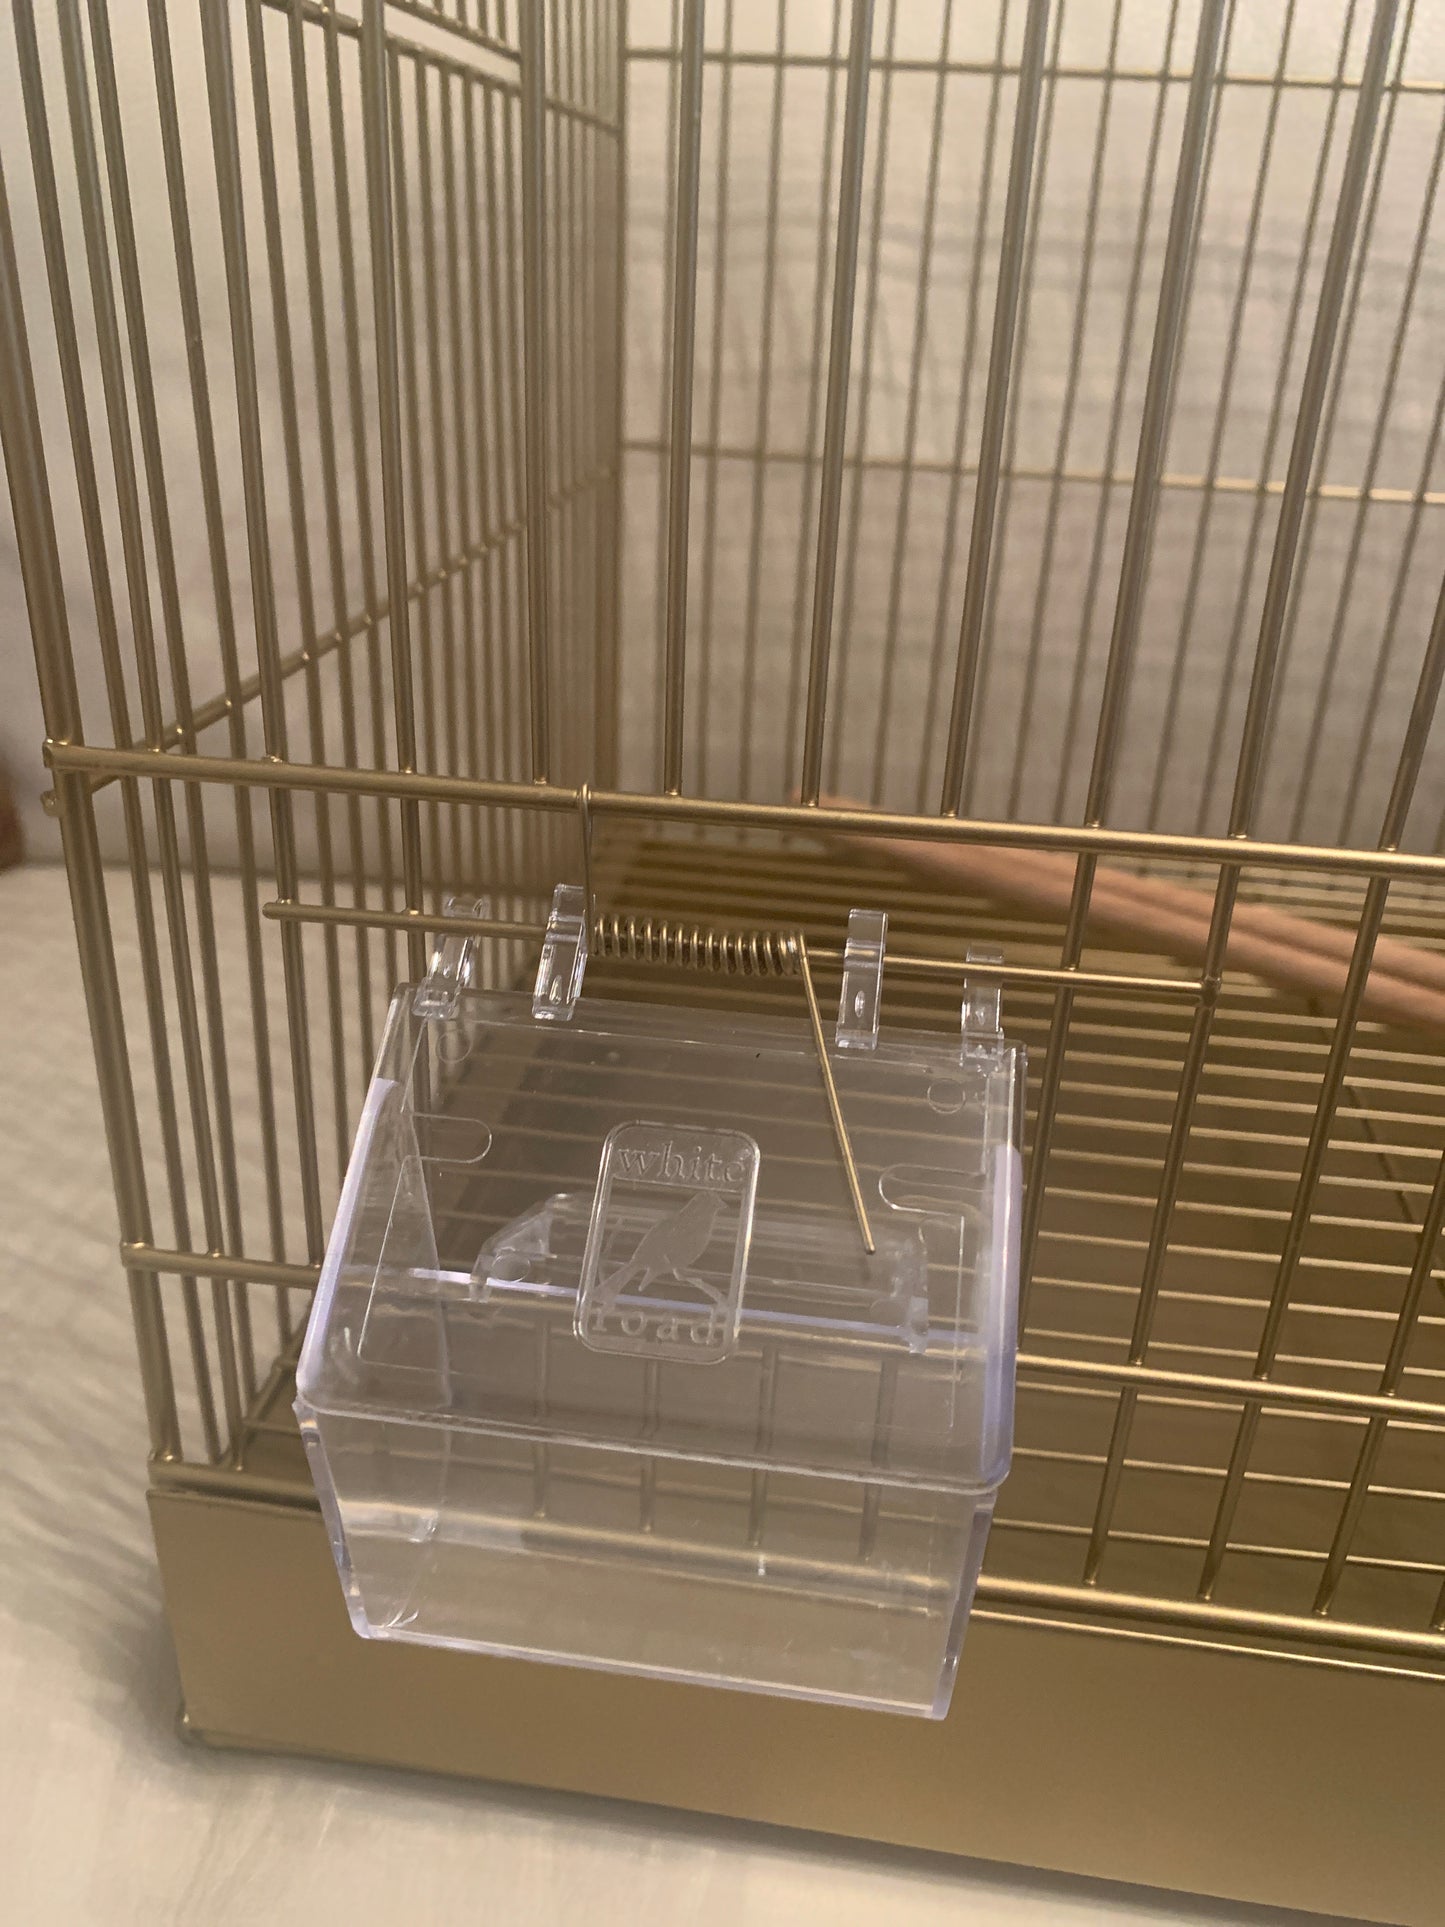 110cm  Gold Metal Double Breeder Bird Cage with Gold Metal Tray includes 8 Feeders & 4 wooden perches Size 110cm x 35cm x 42cm.